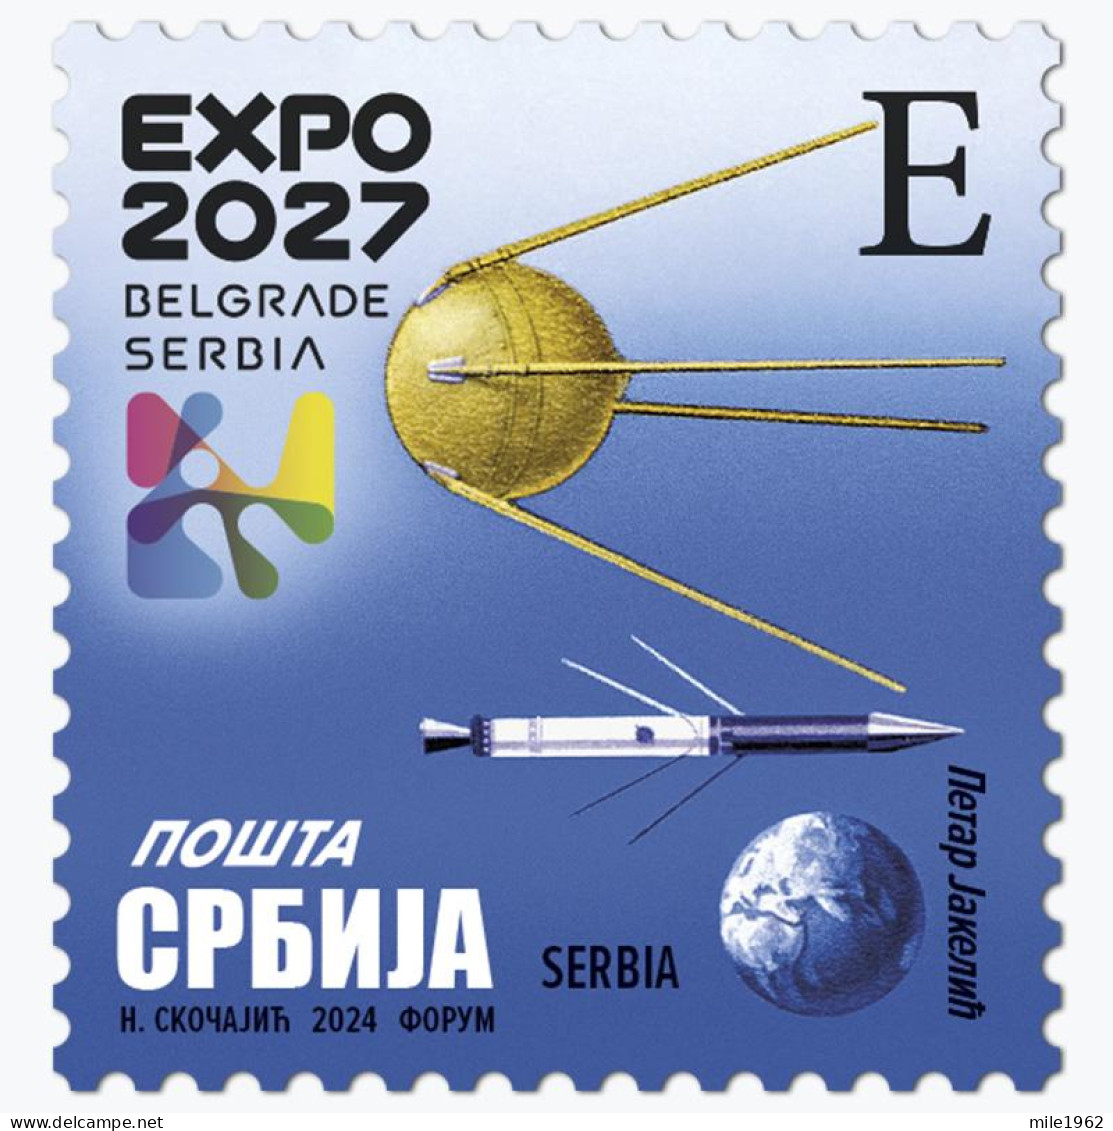 SERBIA 2024 - EXPO 2027, Definitive Stamp E - Serbien